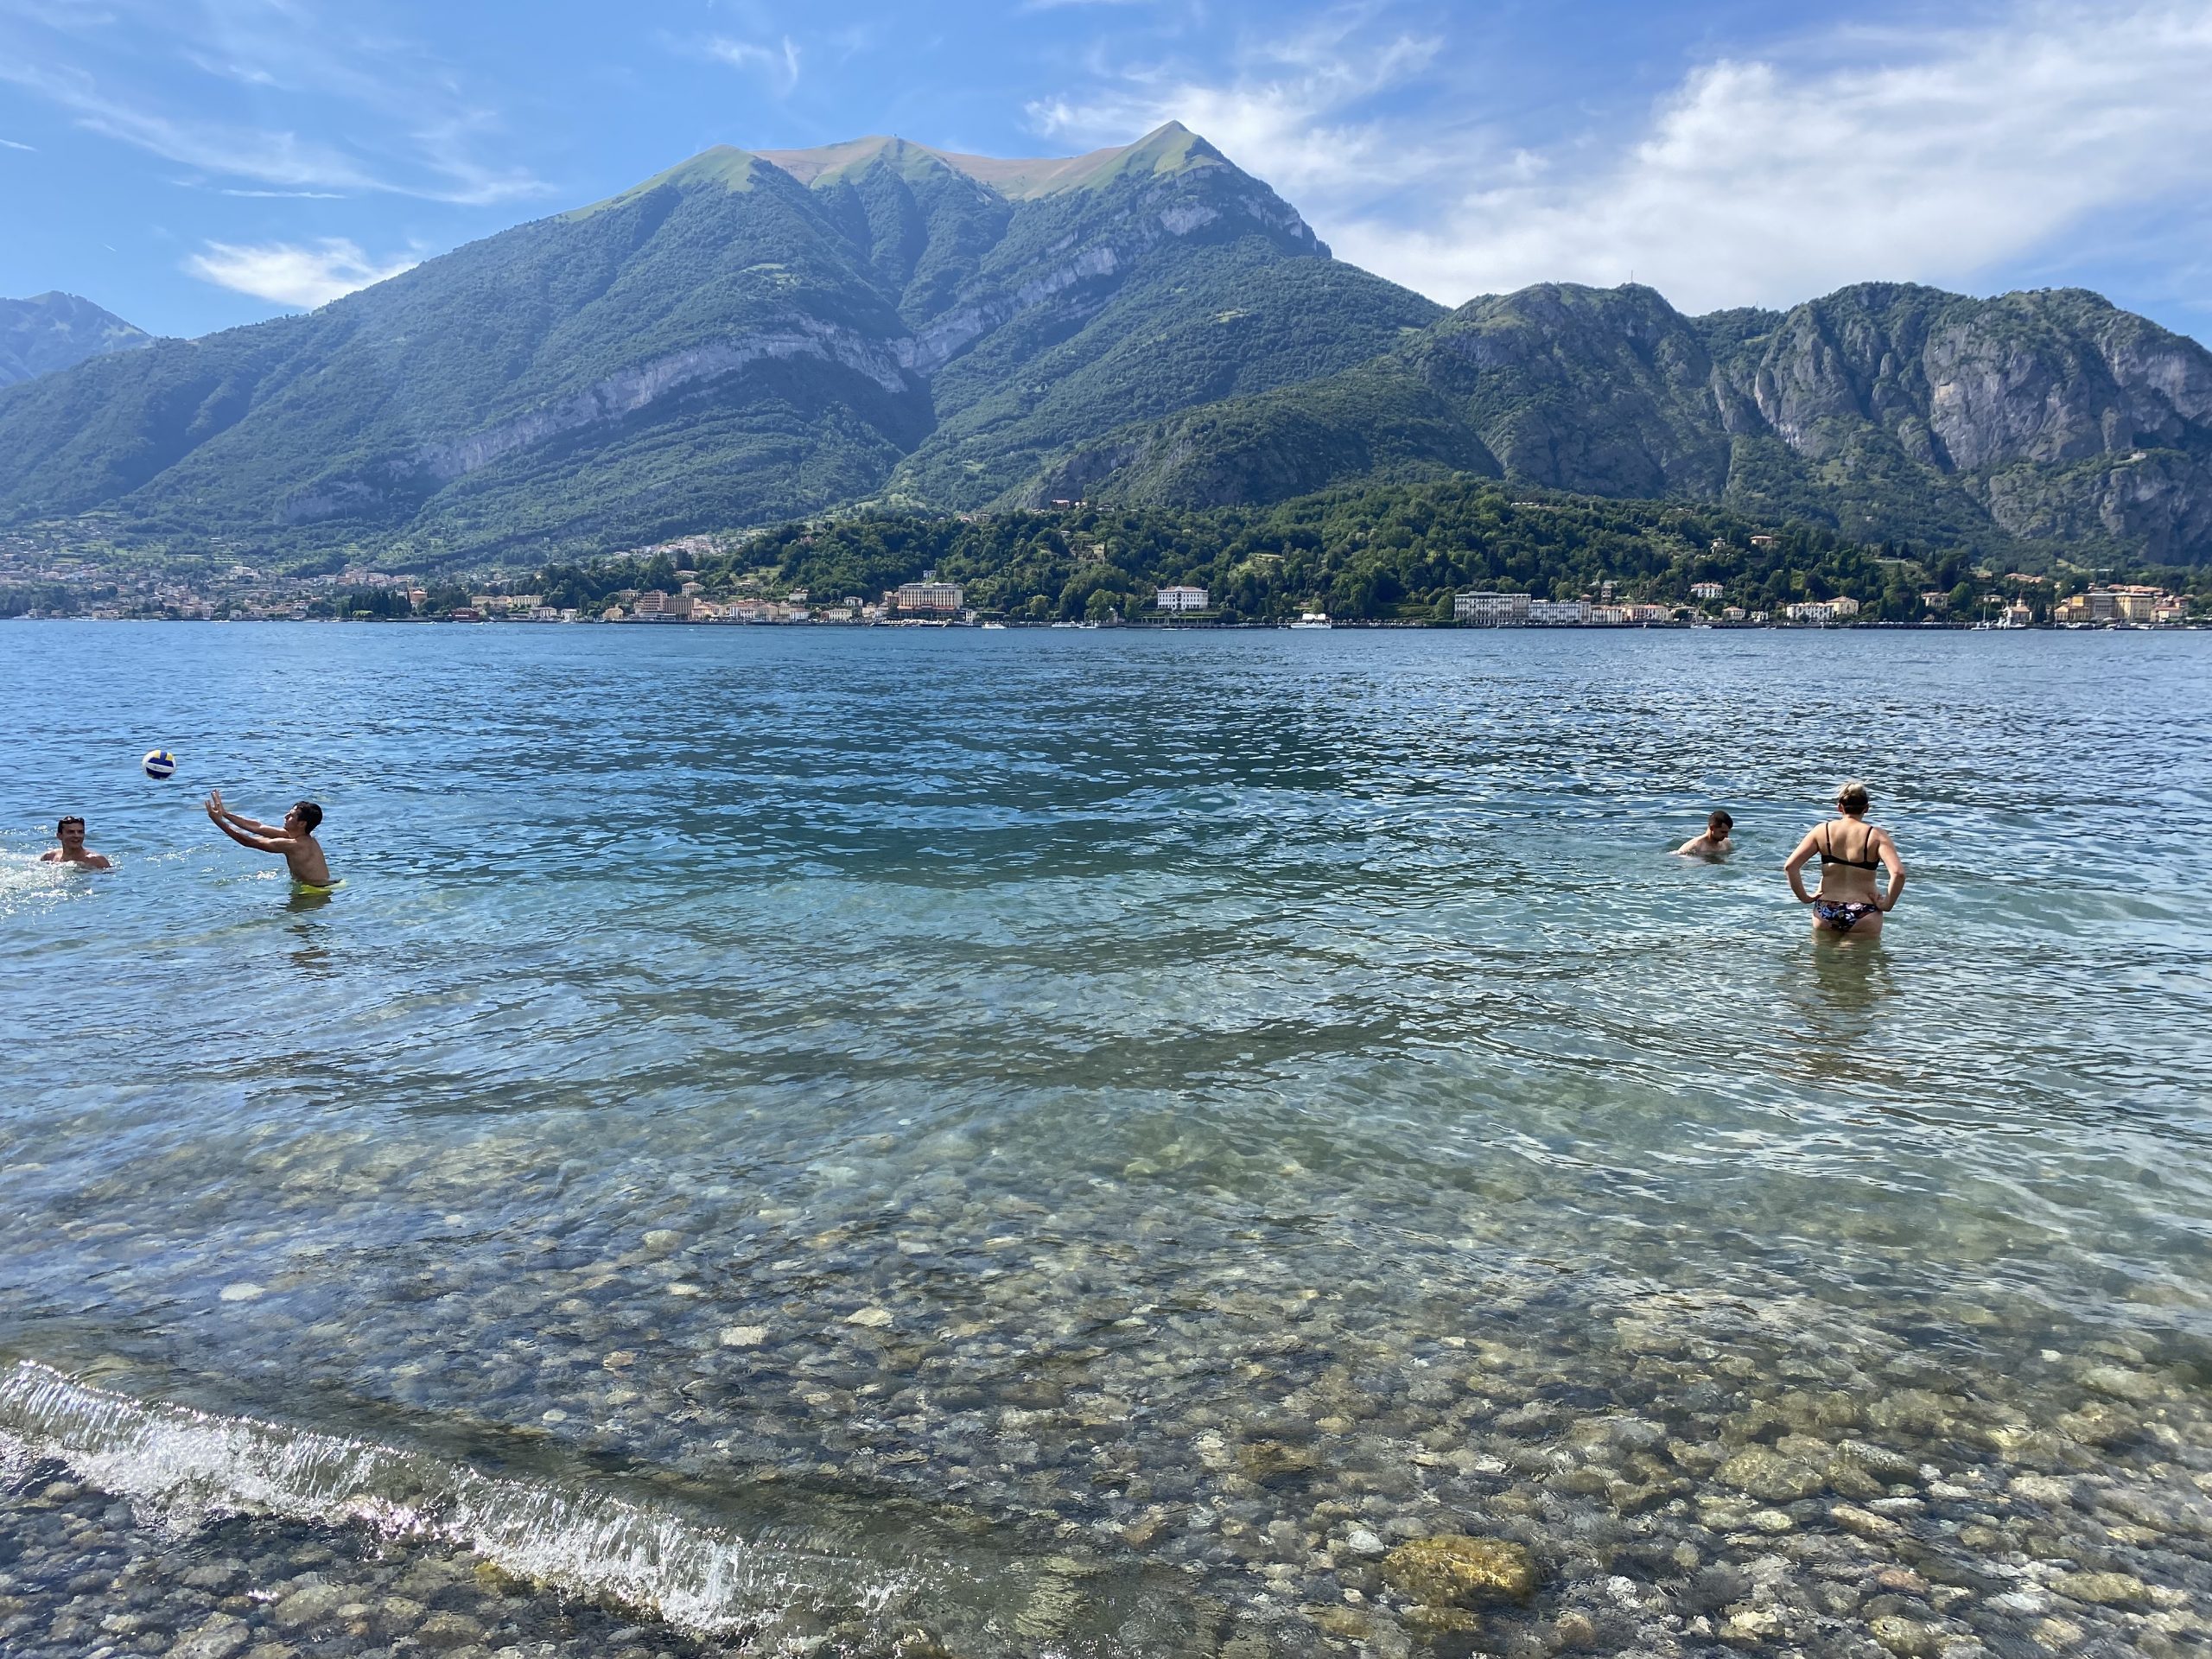 A pebble beach with four people swimming in the blue lake and mountains and towns in the background.